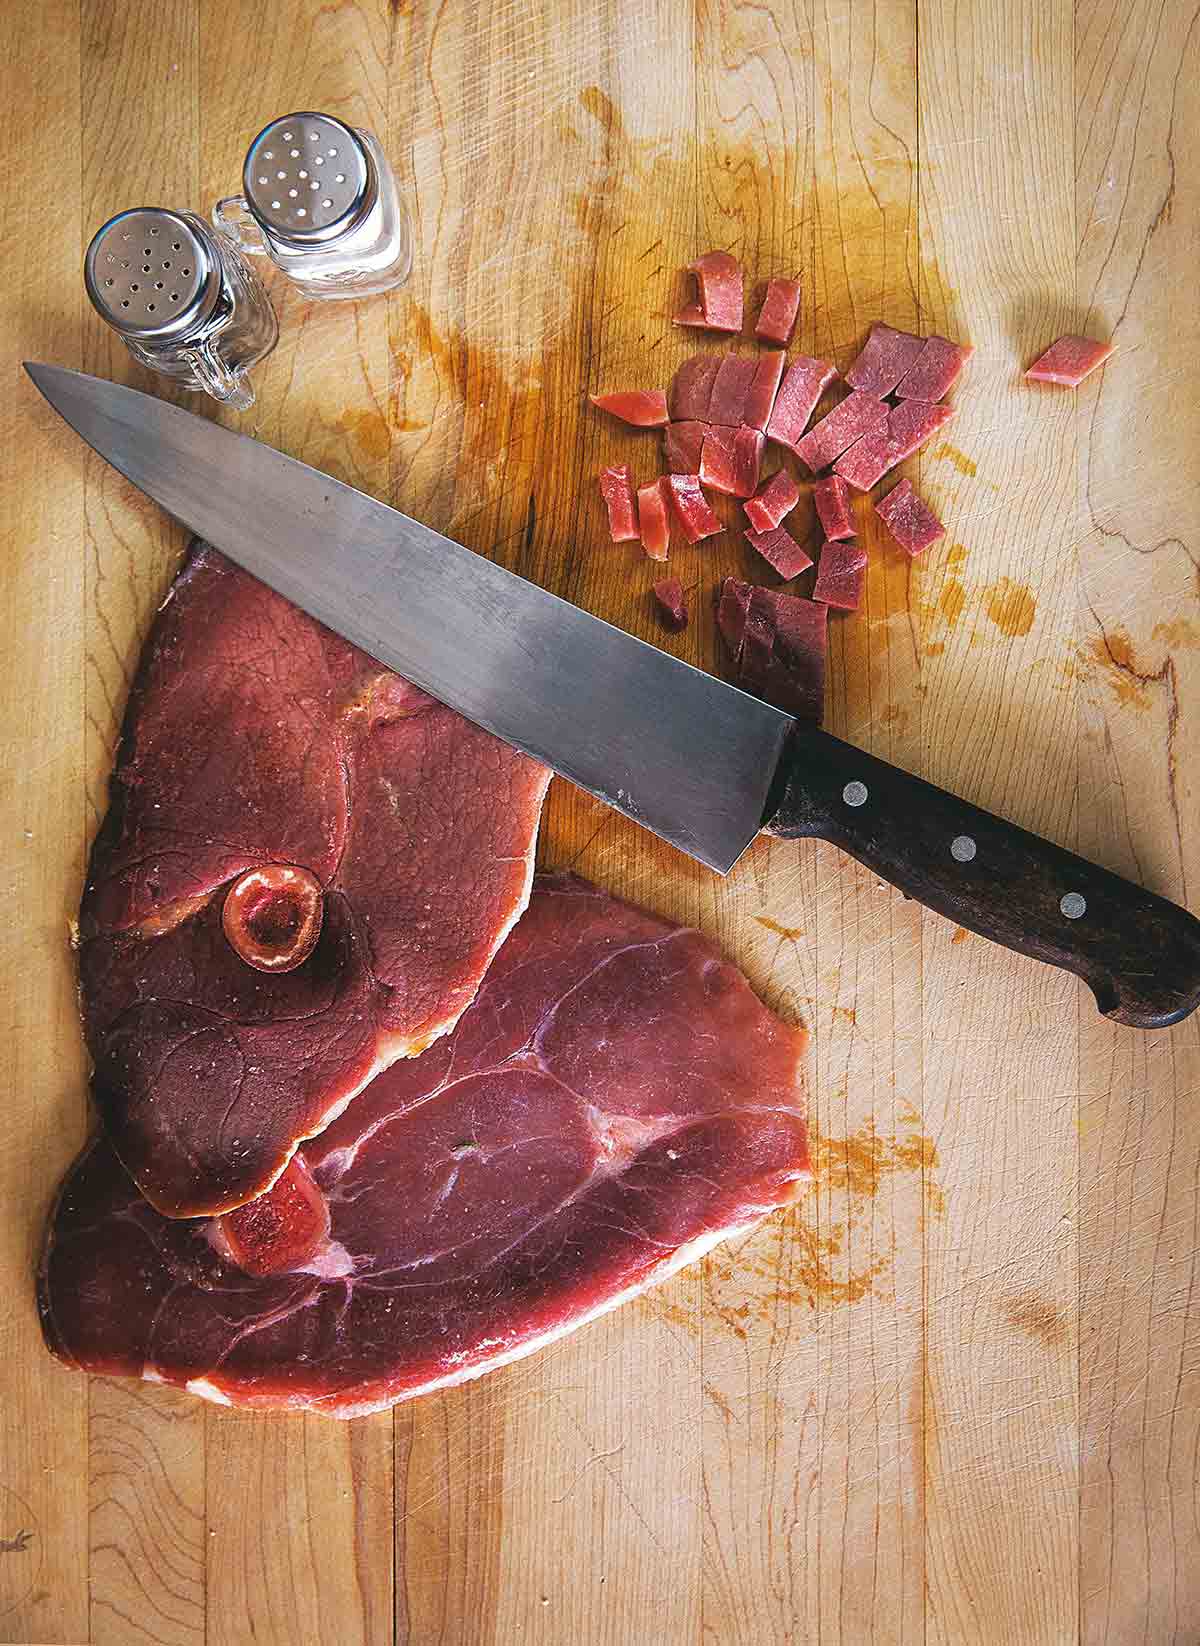 A slice of ham with red eye gravy on a cutting board with a knife and salt and pepper shaker.